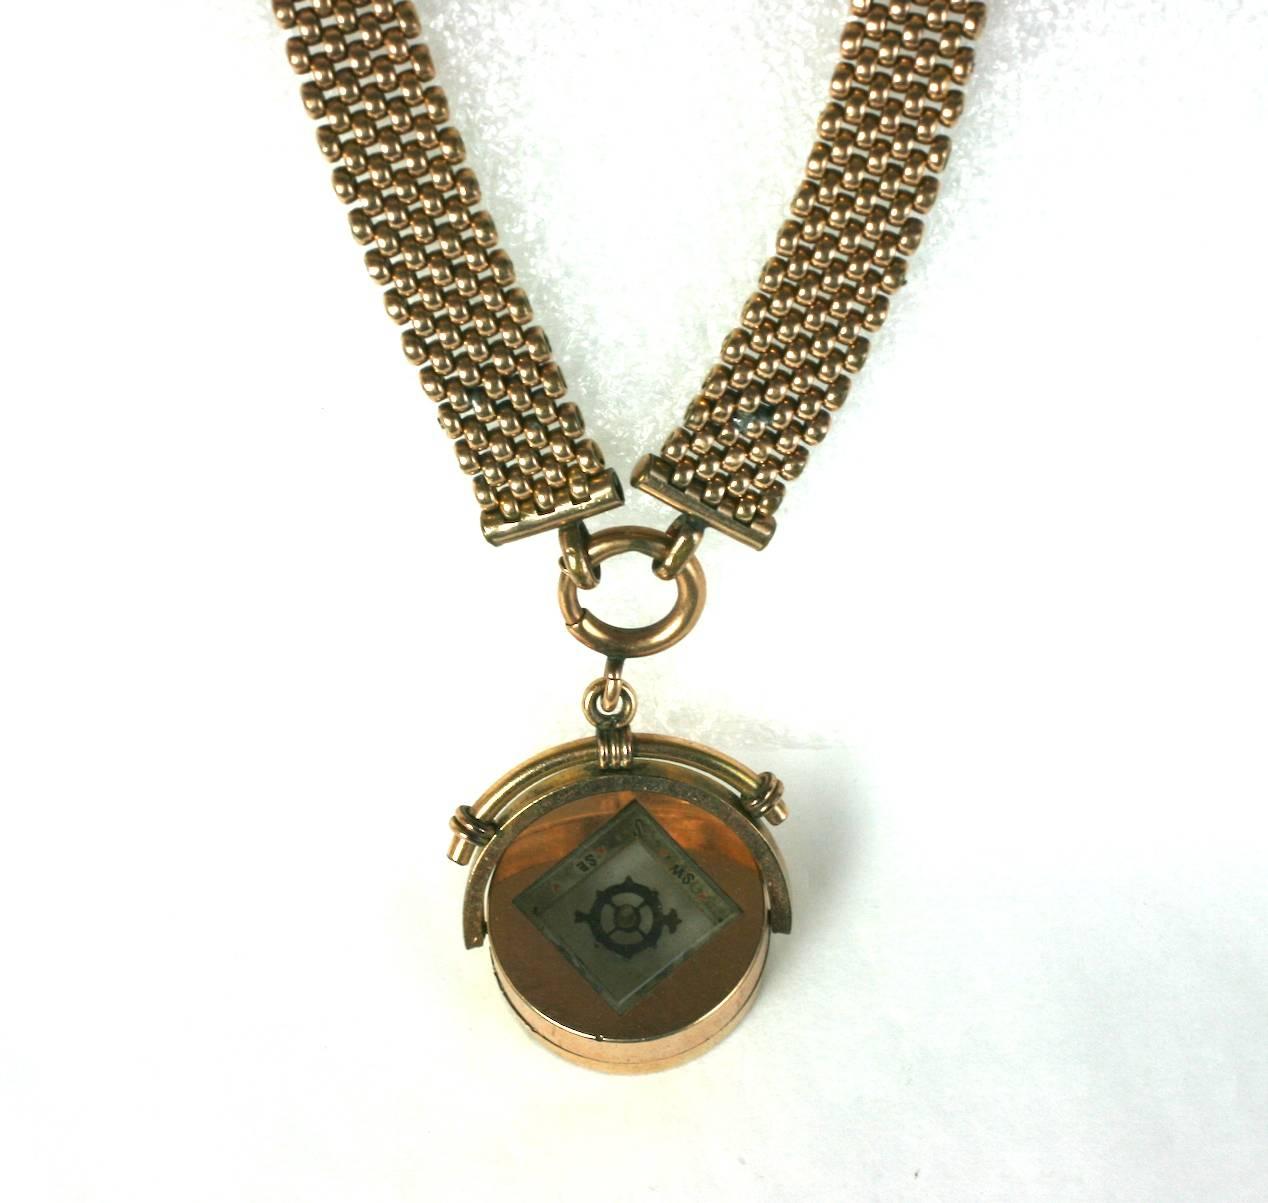 Victorian Swivel Compass Necklace, Original gold filled mesh link chain is matched to a lovely, late Victorian functioning, gold filled swivel locket. Compass fob is reversible and functions on both sides. Wonderfully paired for a modern aesthetic.